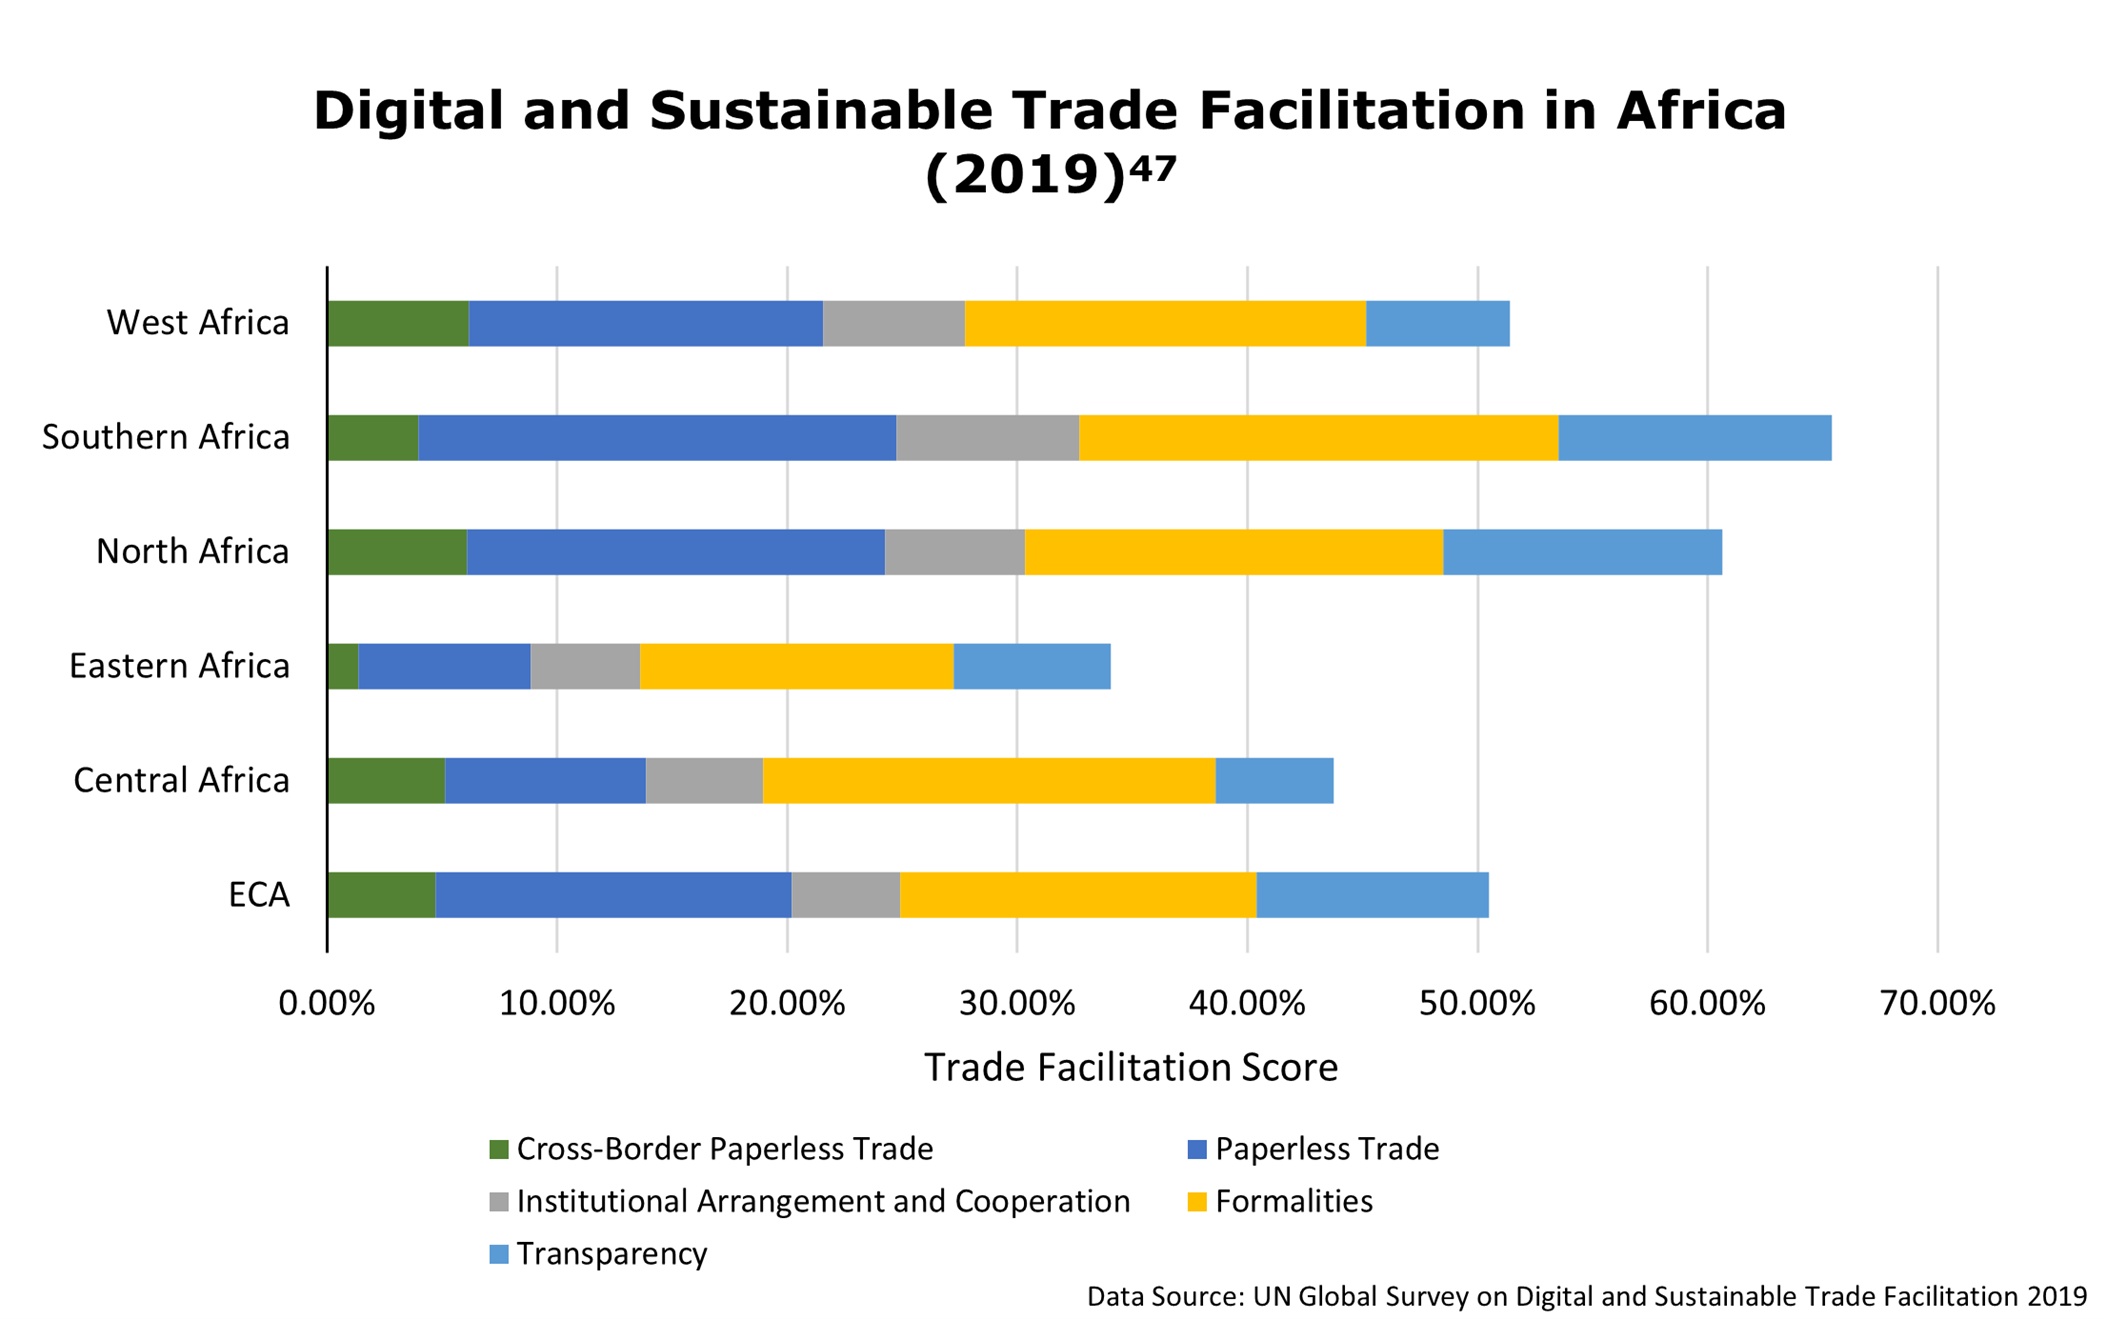 Figure of digital and sustainable trade facilitation in Africa